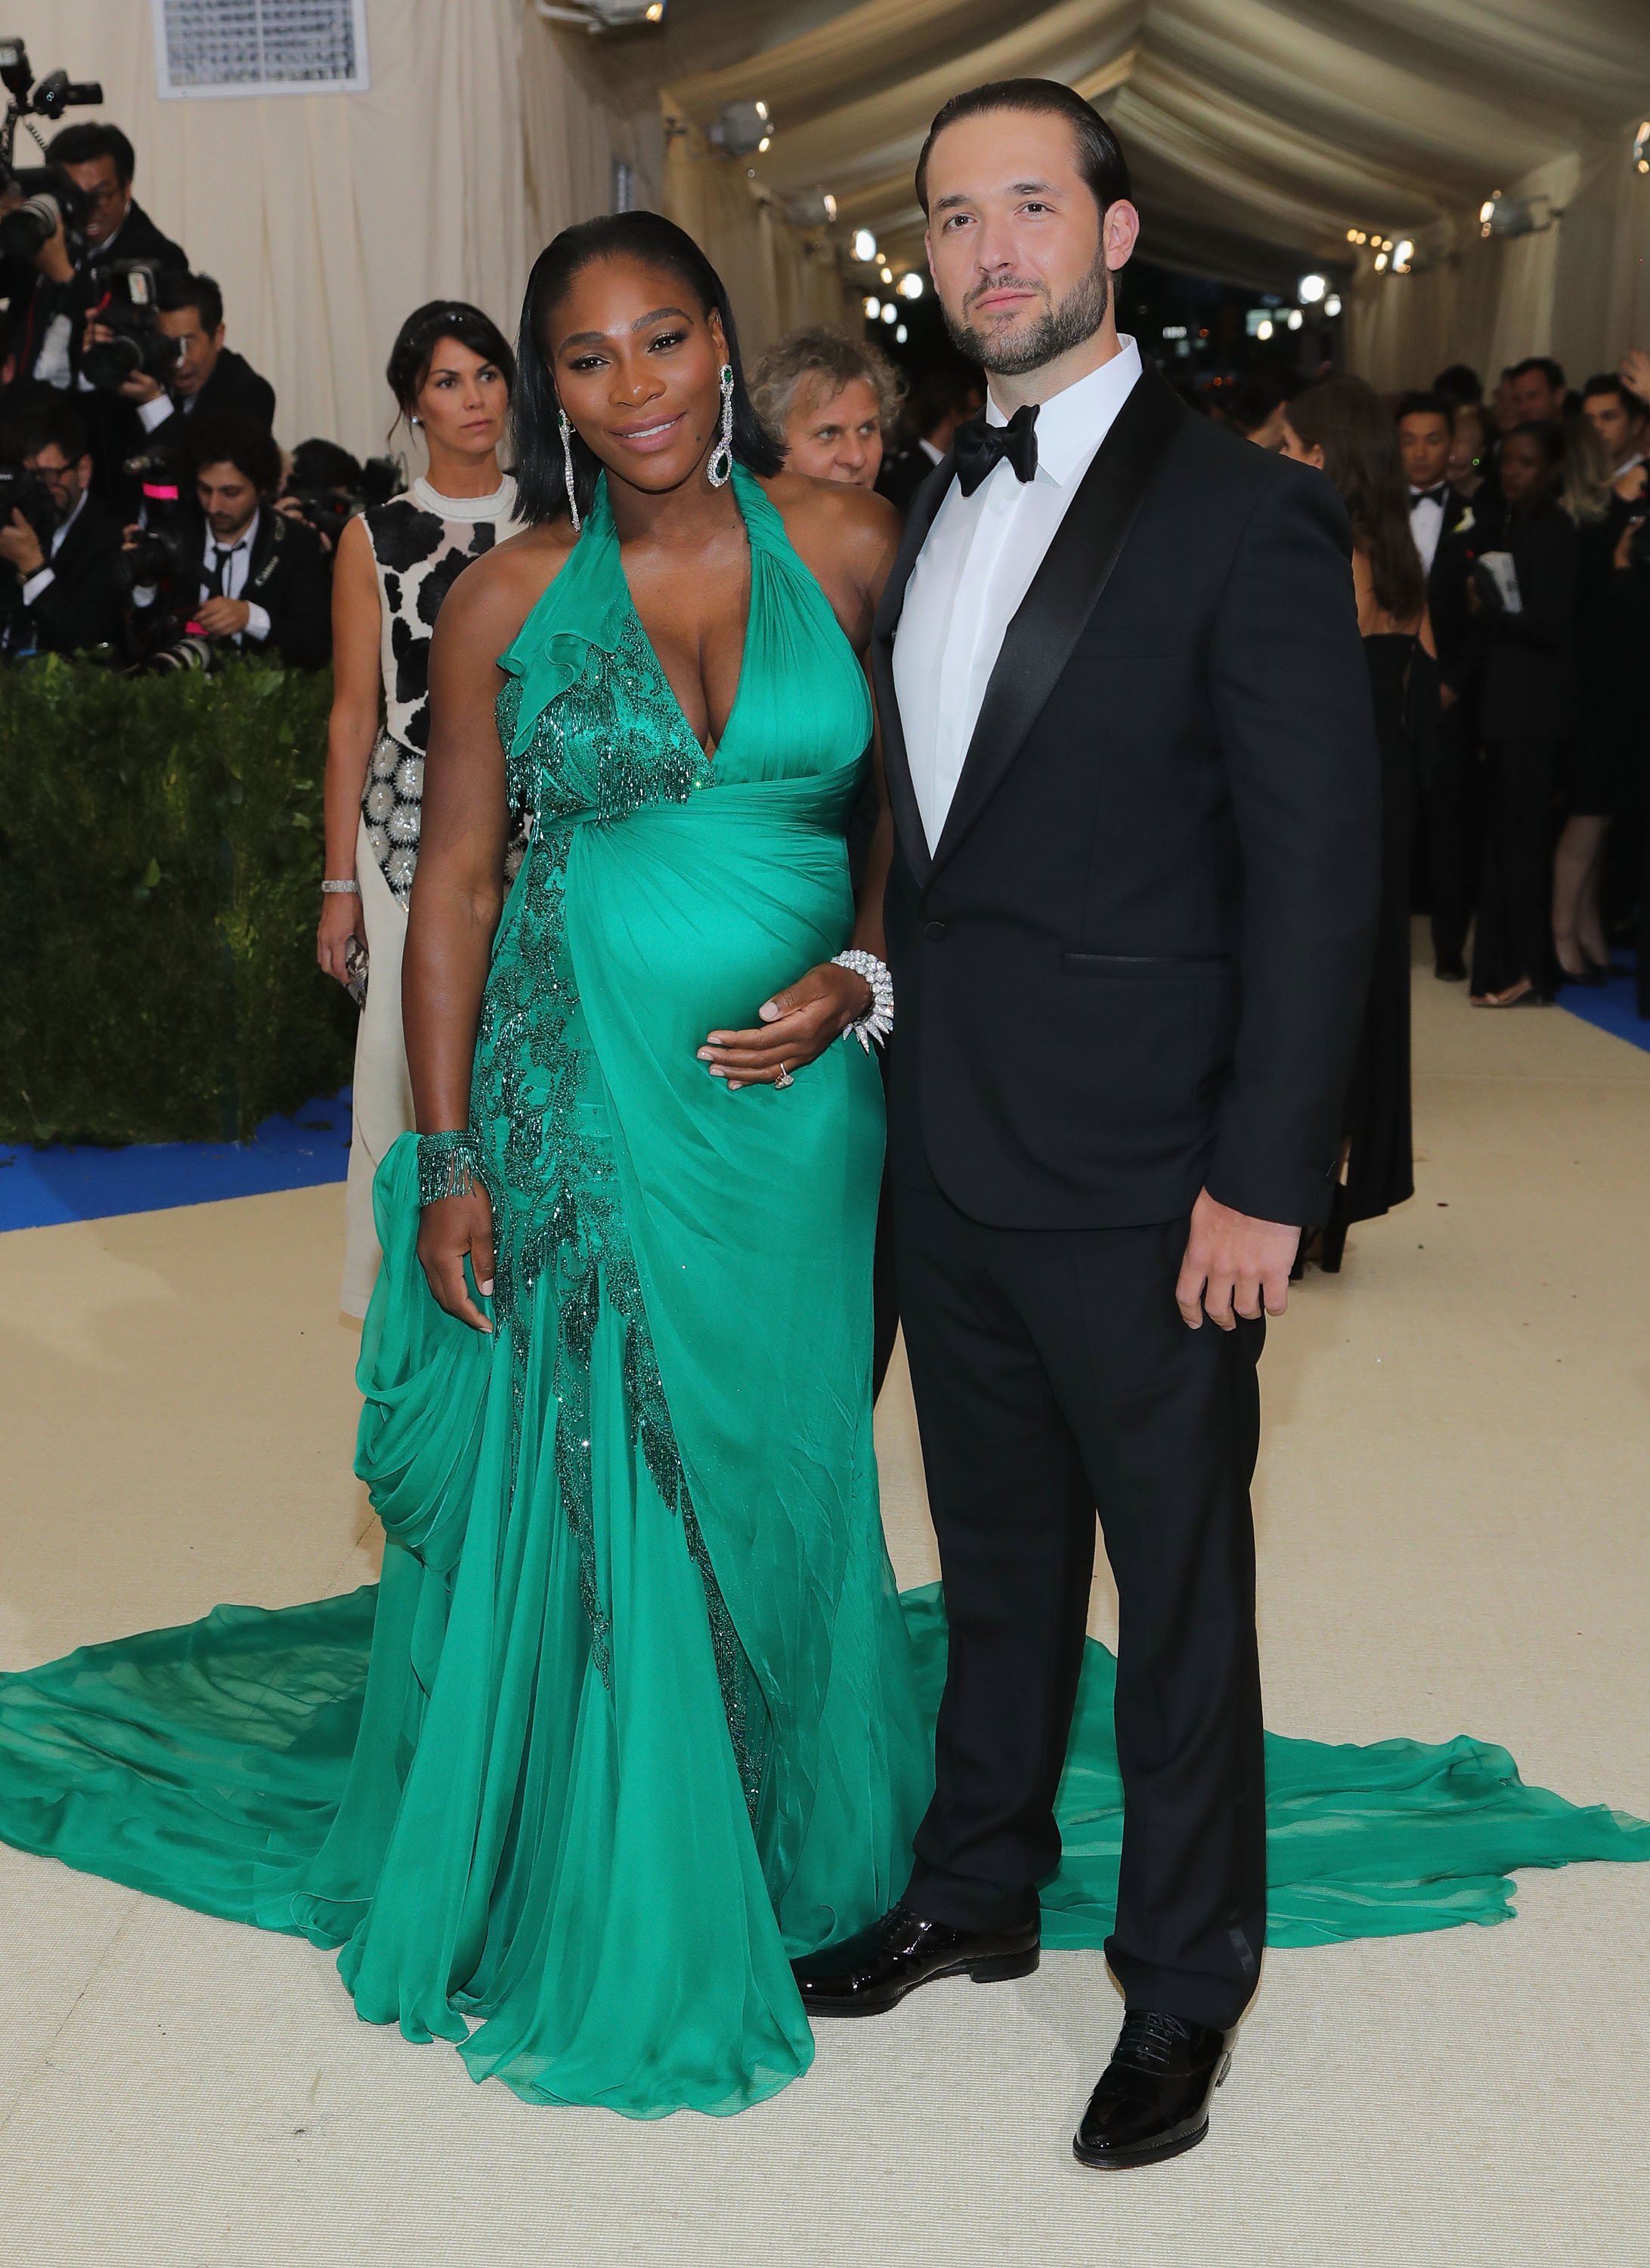 Serena Williams and Alexis Ohanian at the "Rei Kawakubo/Comme des Garcons: Art Of The In-Between" Costume Institute Gala on May 1, 2017, in New York City | Source: Getty Images